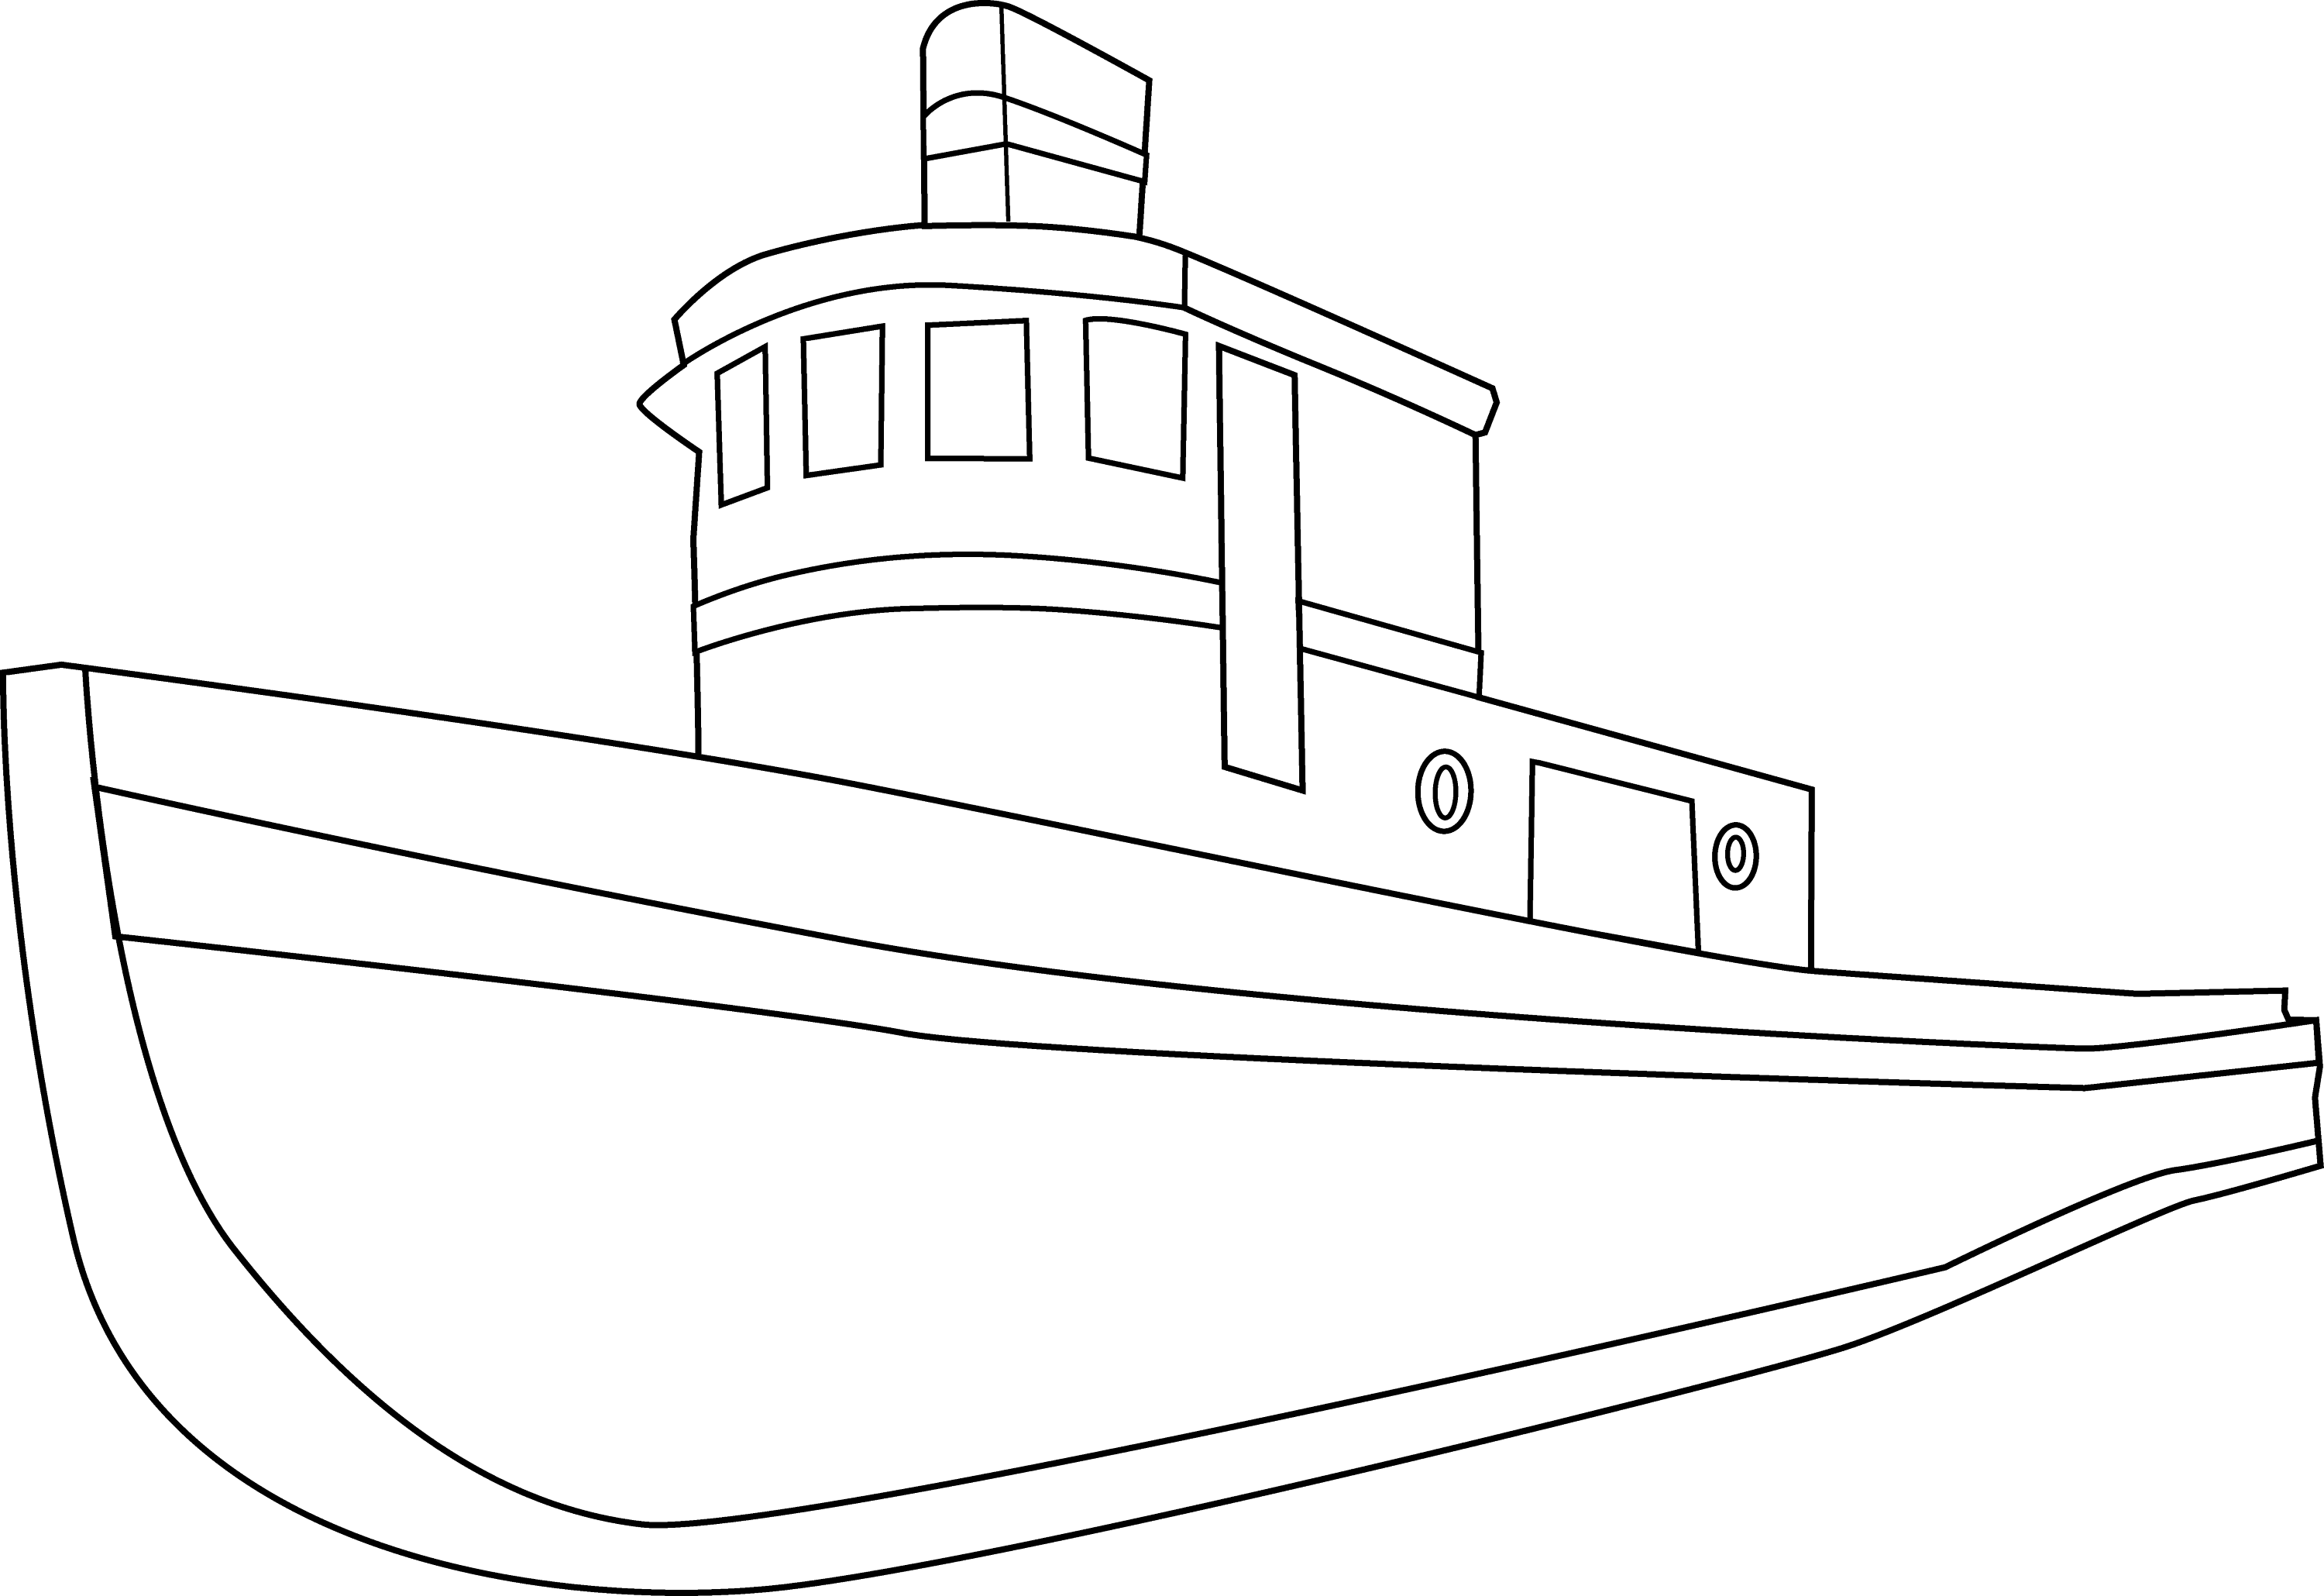 clipart of a ship - photo #32